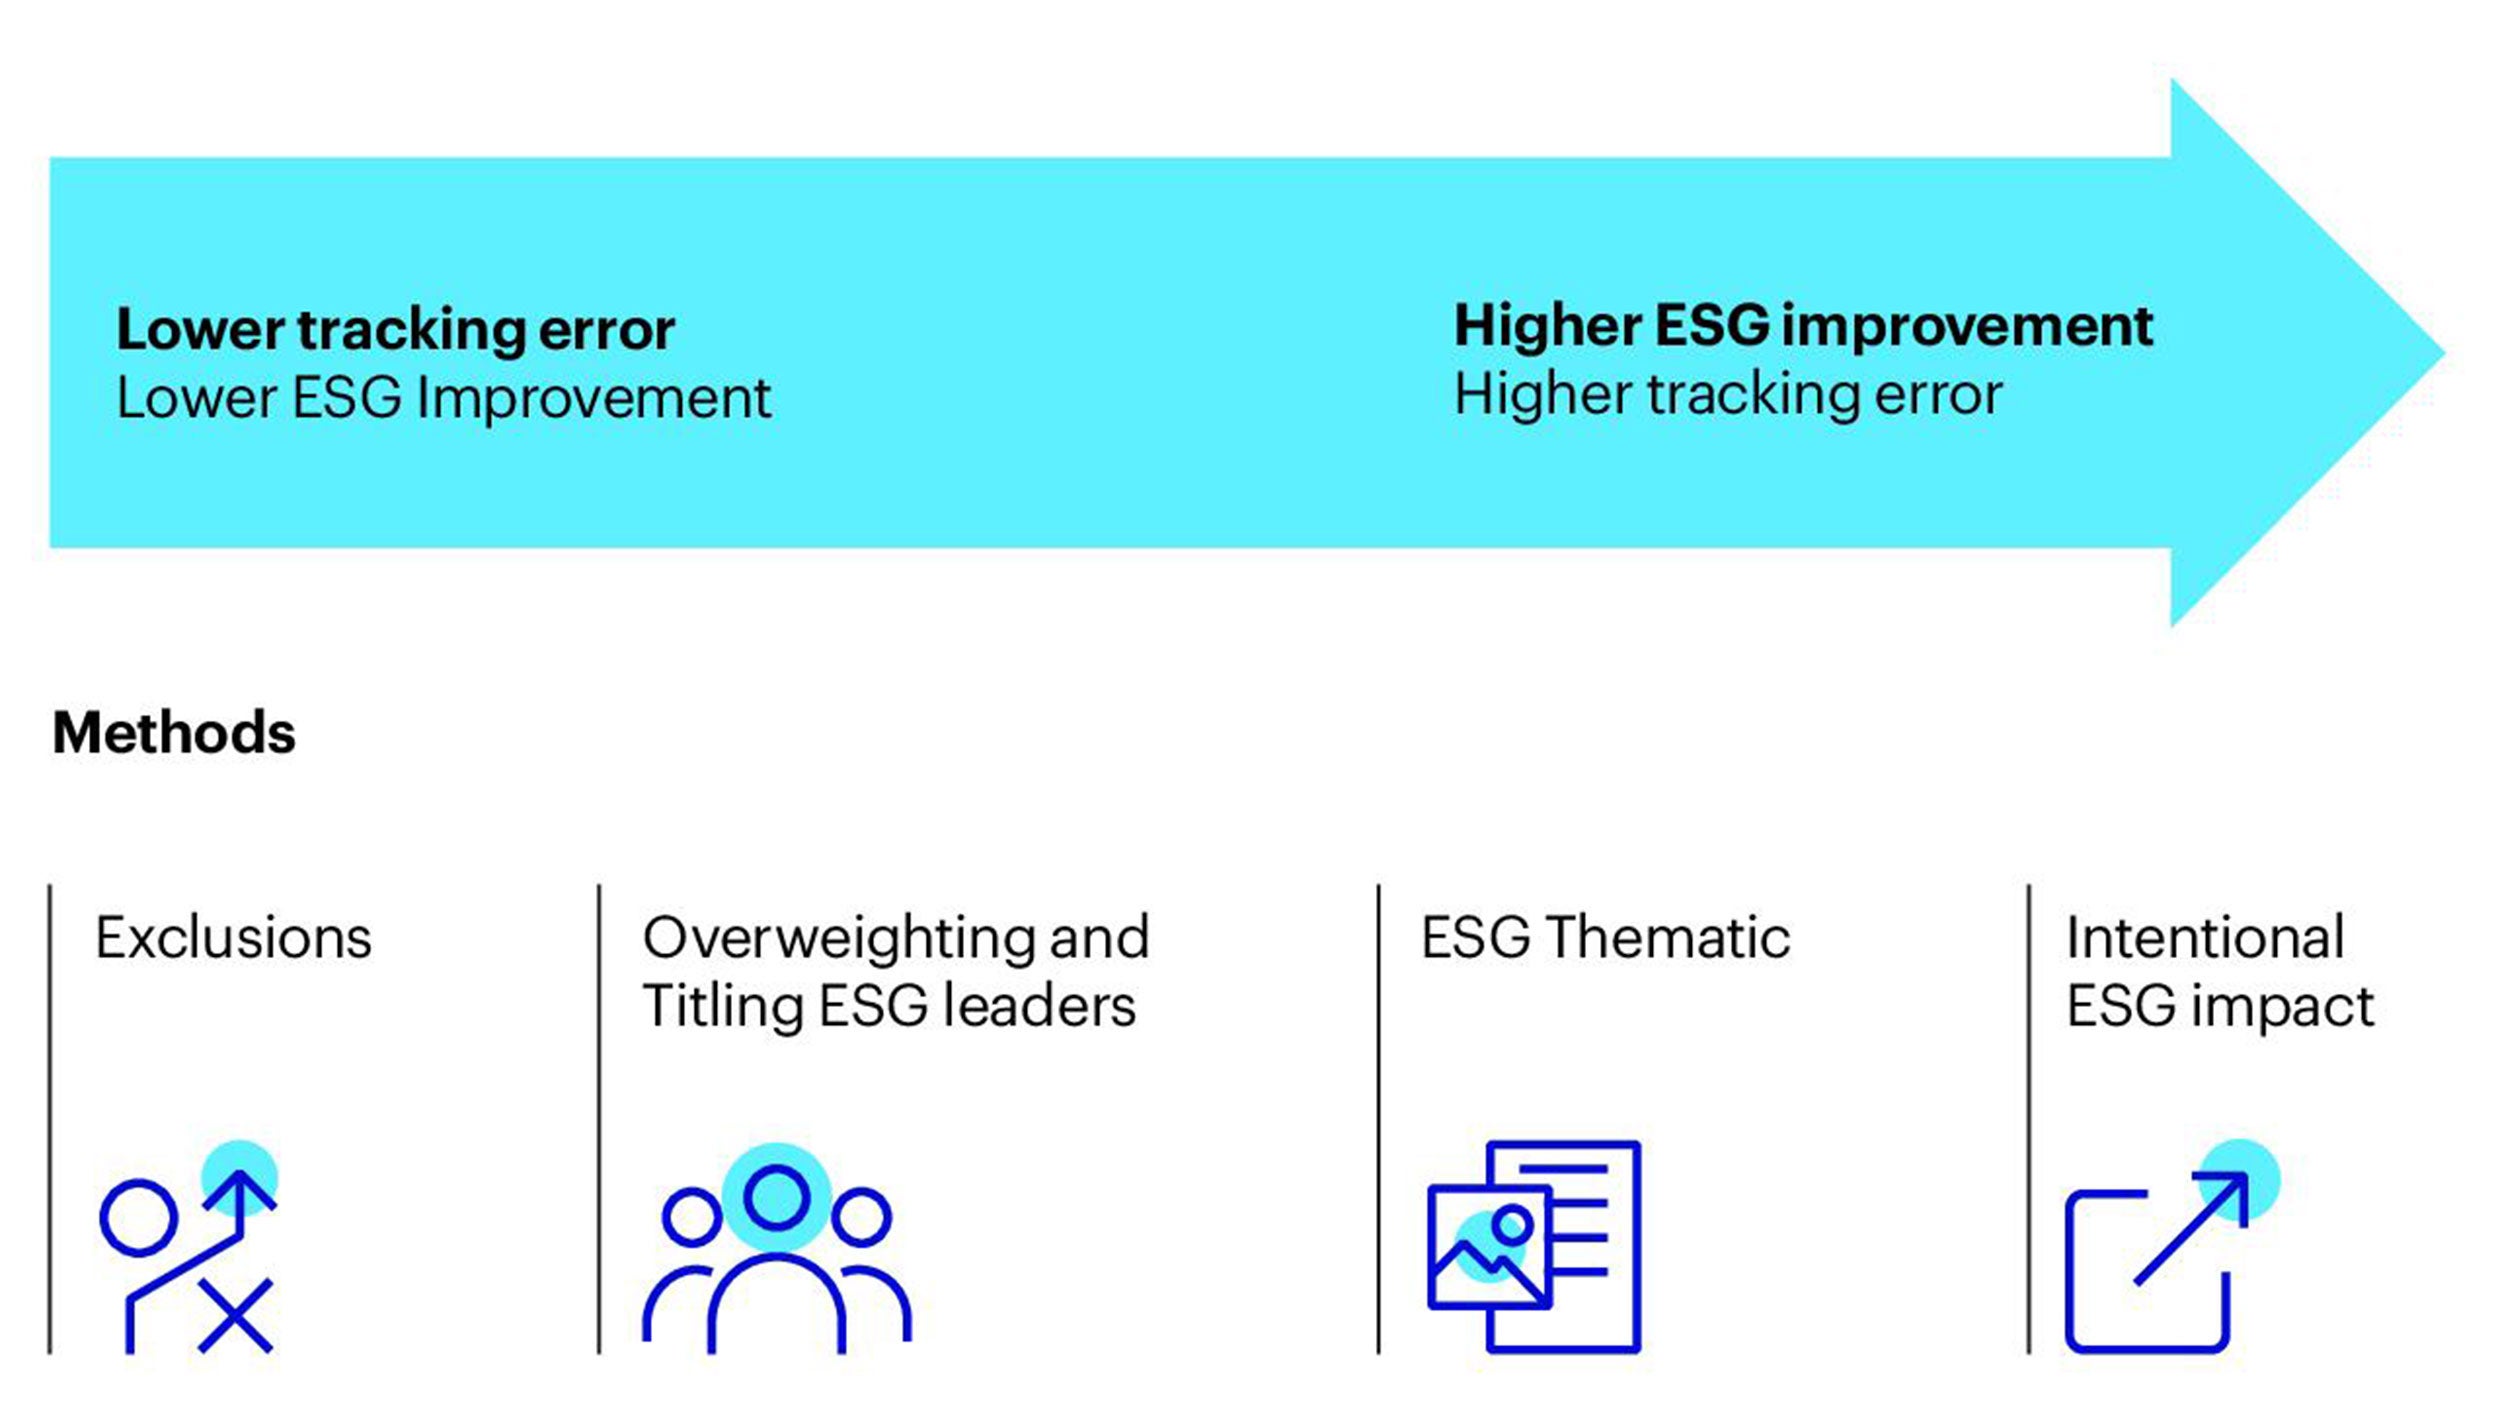 Tracking error and targeted specific ESG outcomes